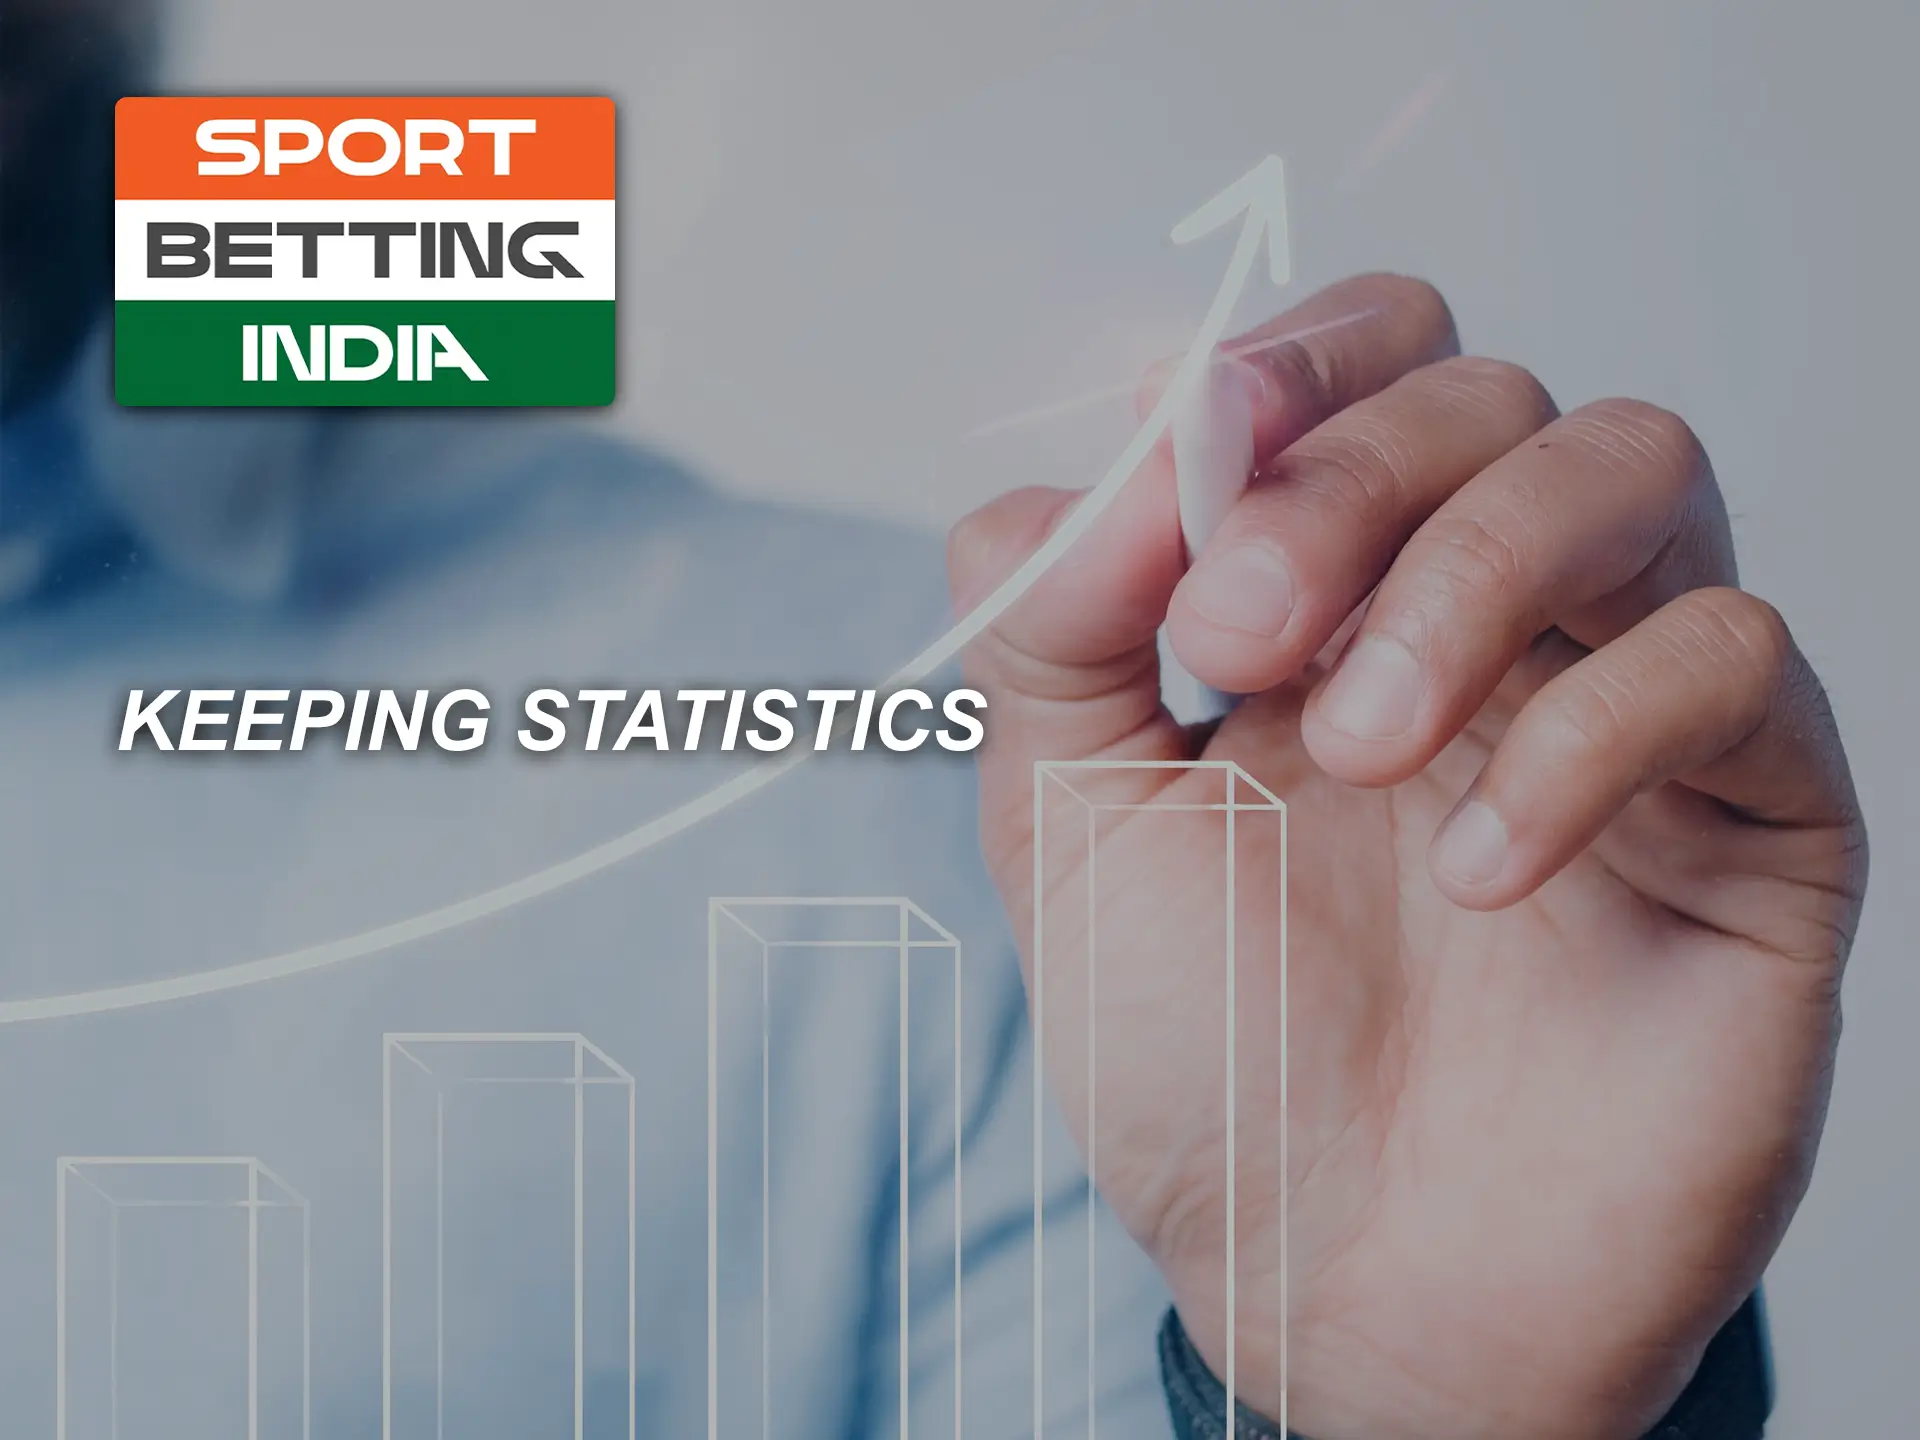 Keep statistics and analyse your bets to increase your win rate.